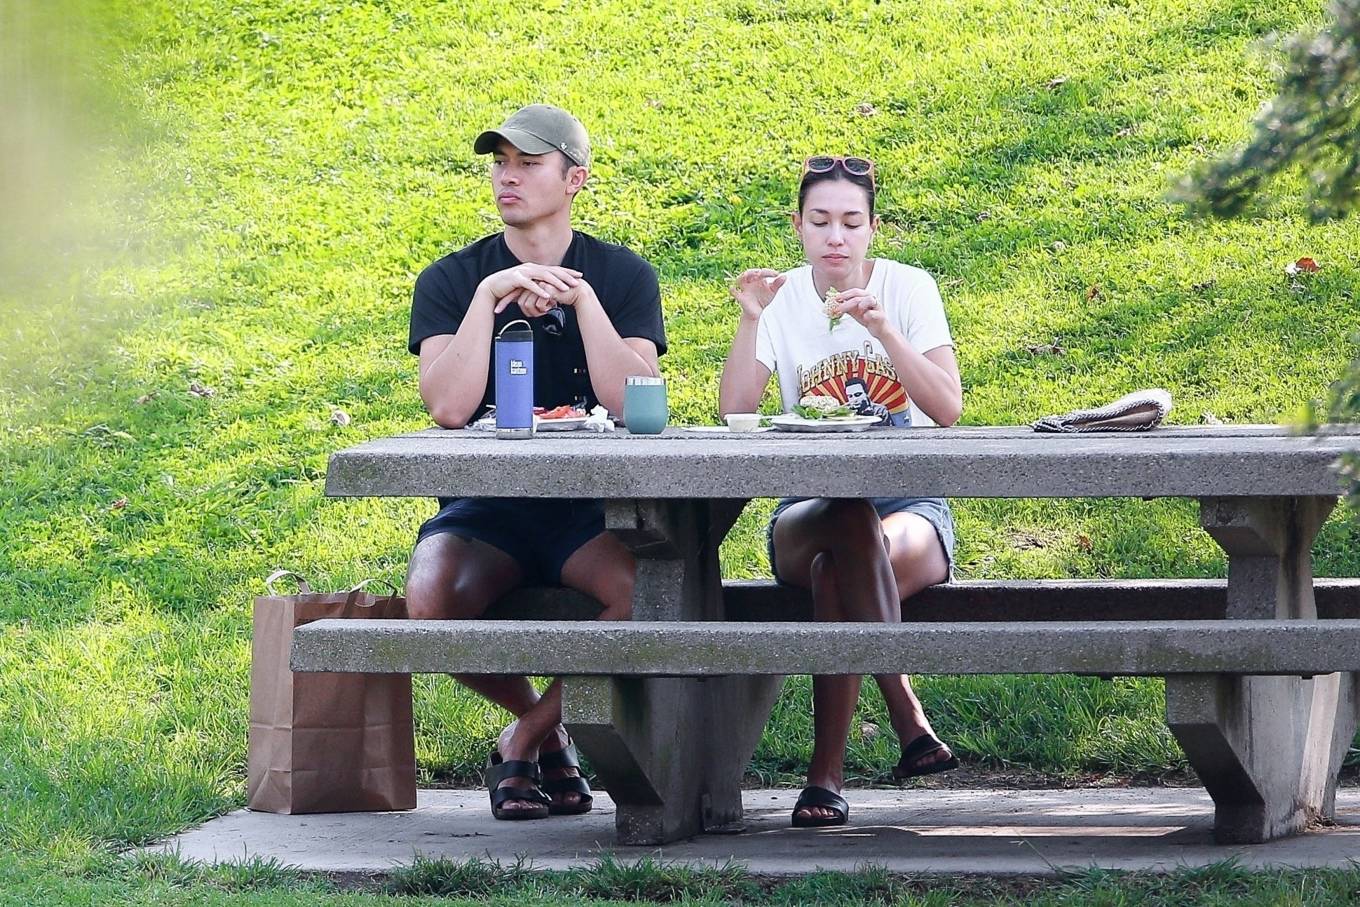 Henry Golding with his wife Liv Lo Golding at a local park in Los Angeles